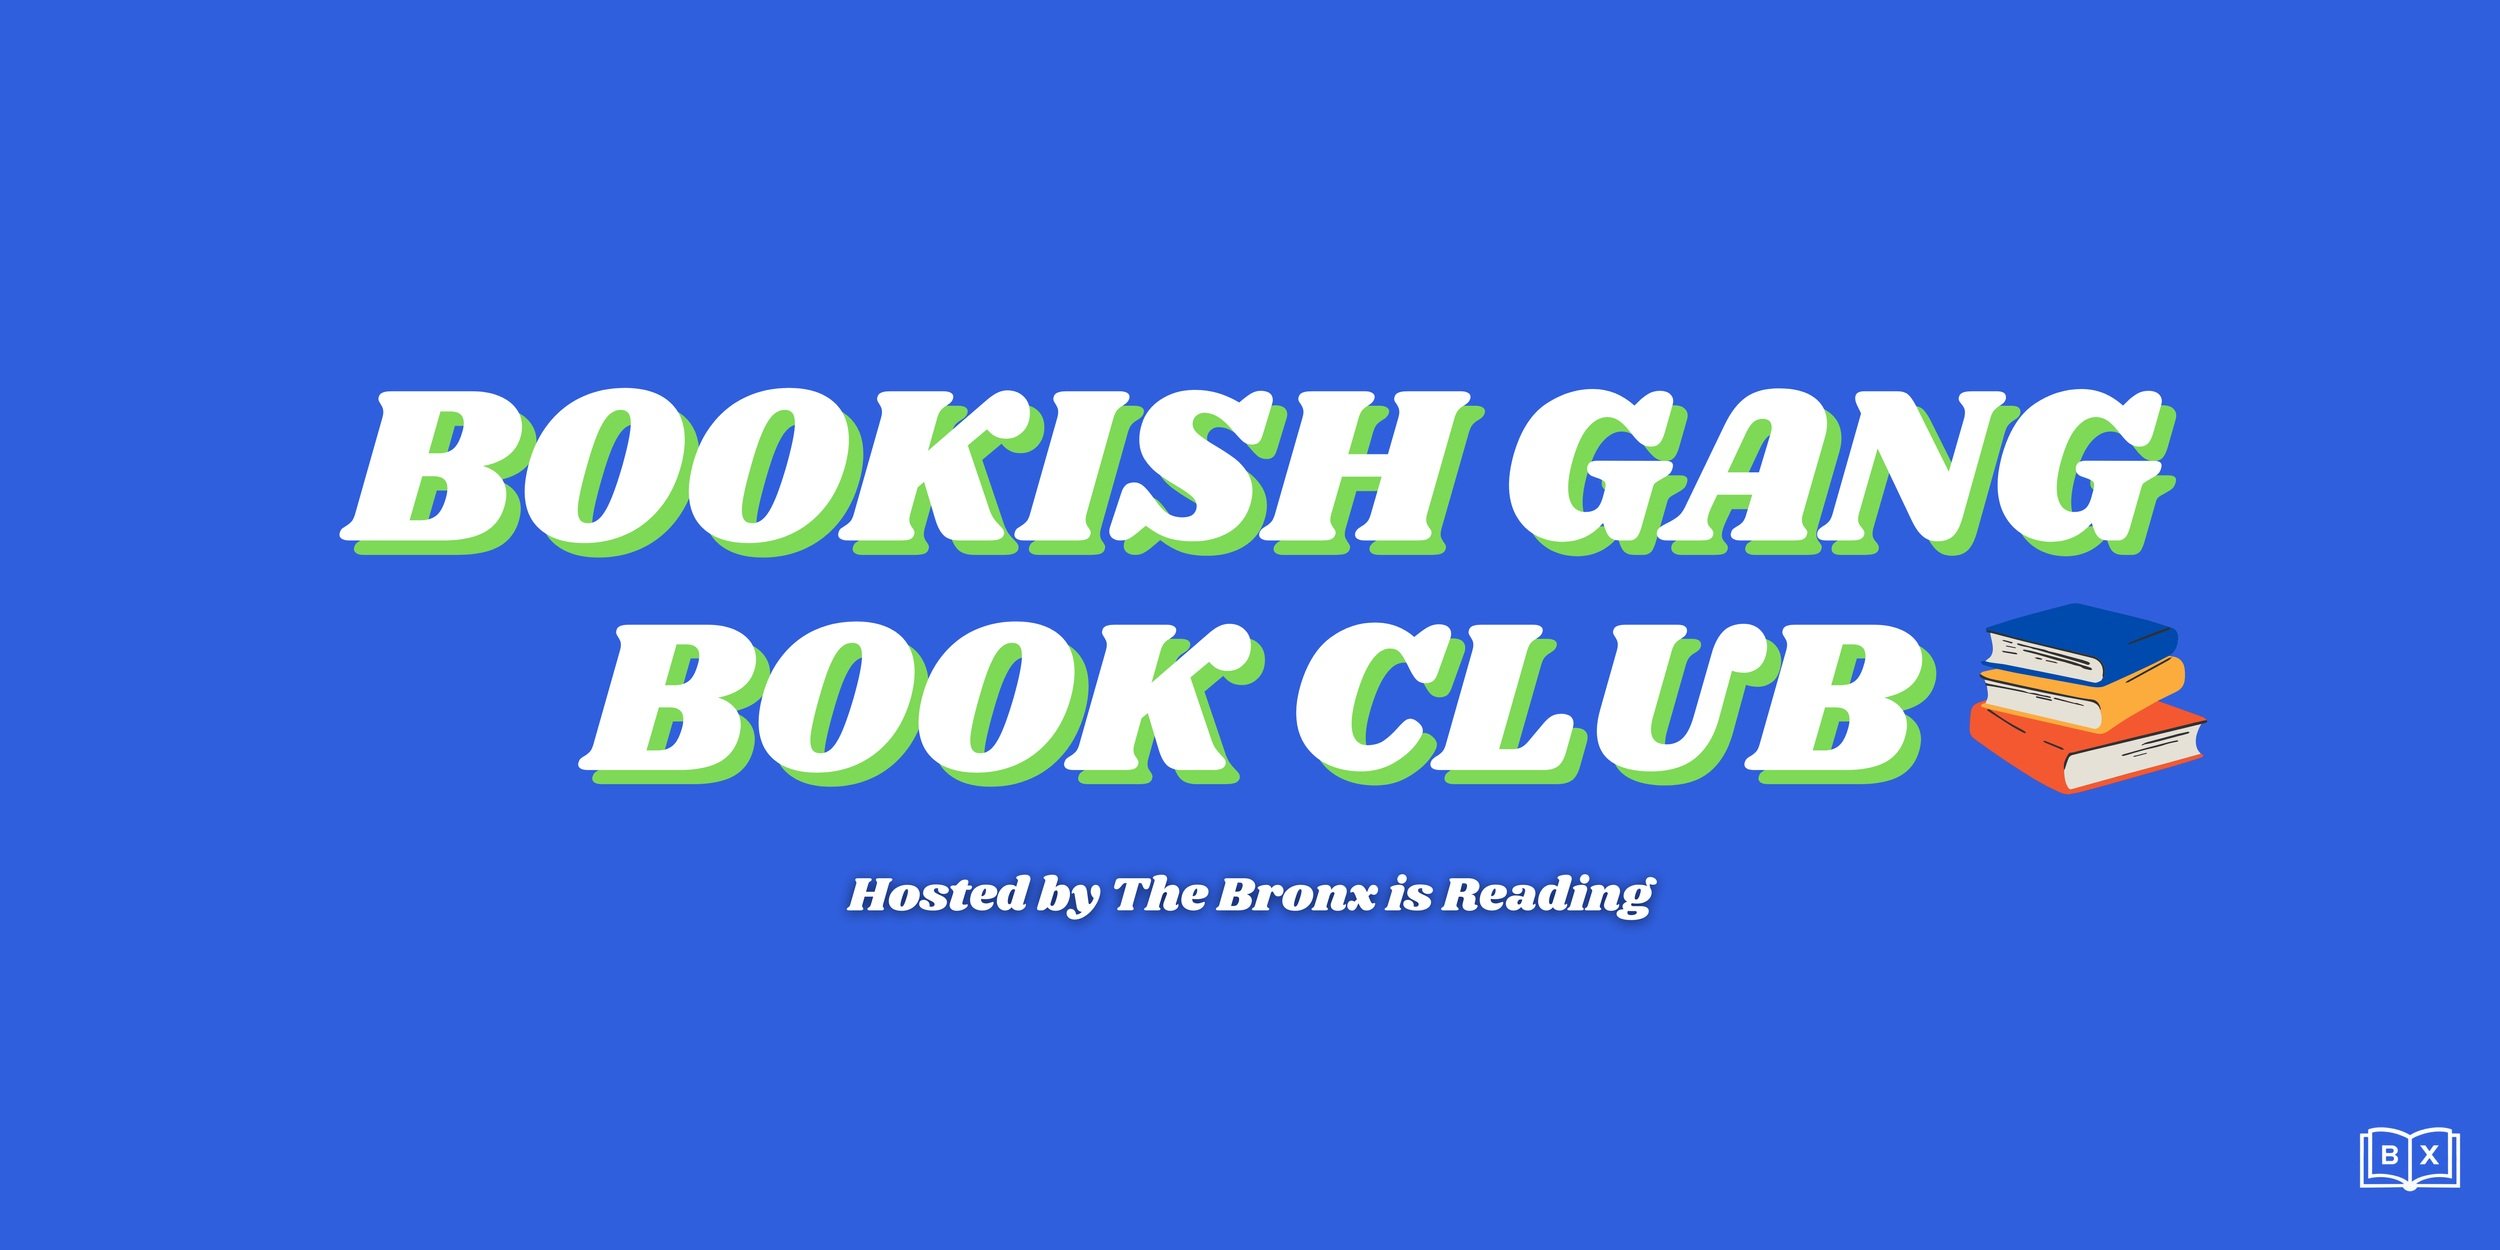 Bookish+Gang+Book+Club+Graphic+%28400+%C3%97+280+px%29+%2872+%C3%97+36+in%29.jpg